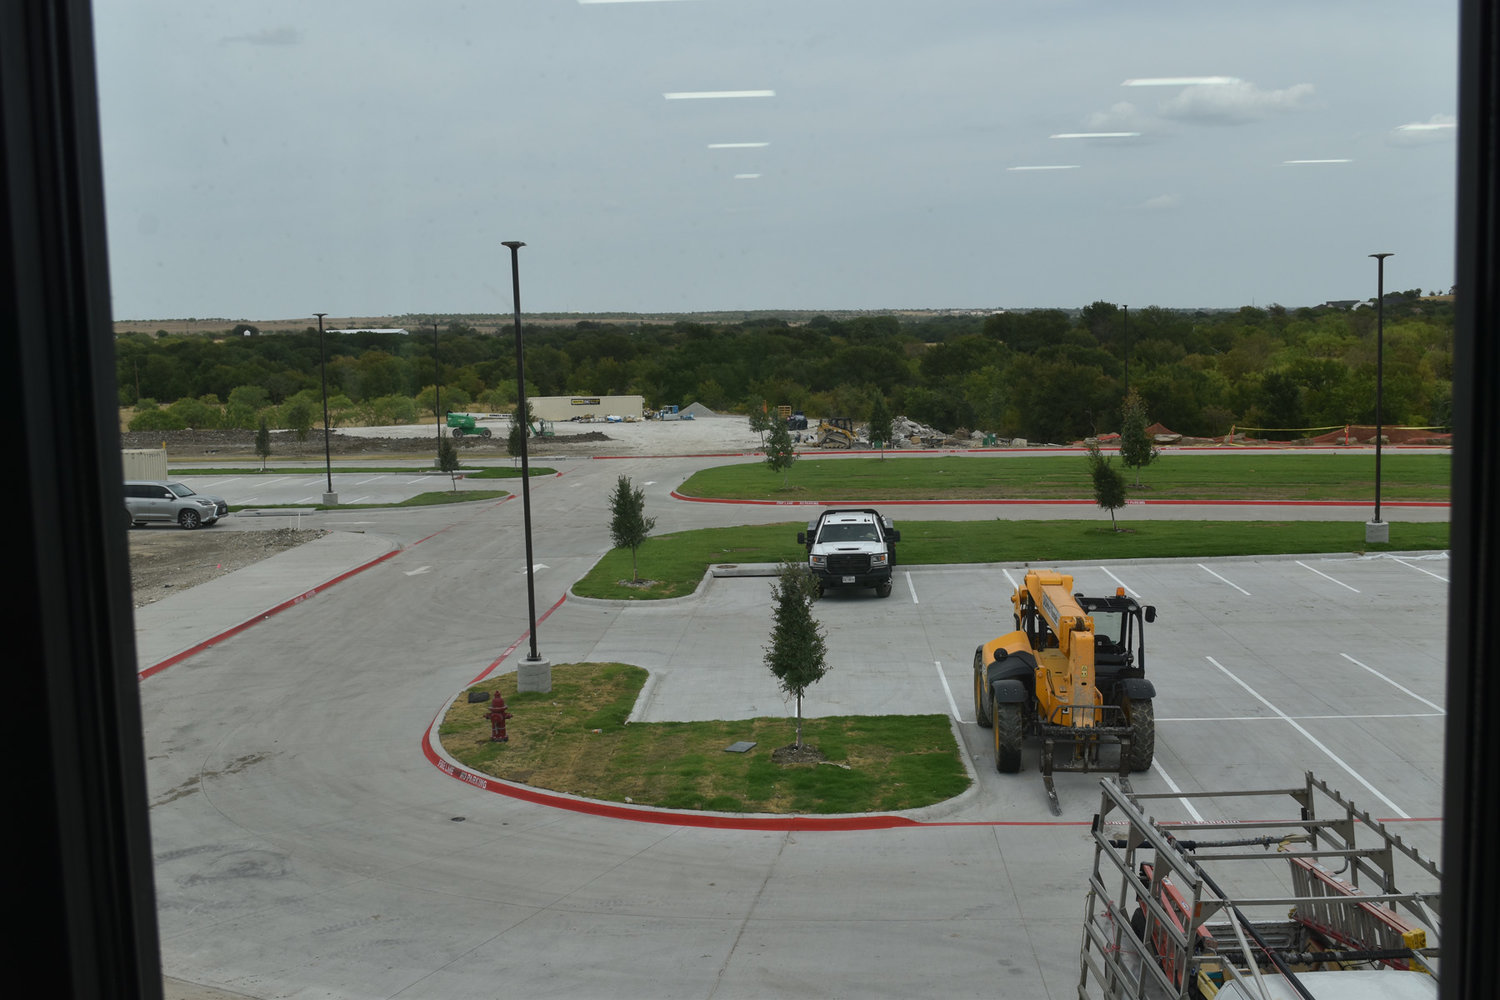 View of parking lot from upstairs hallway